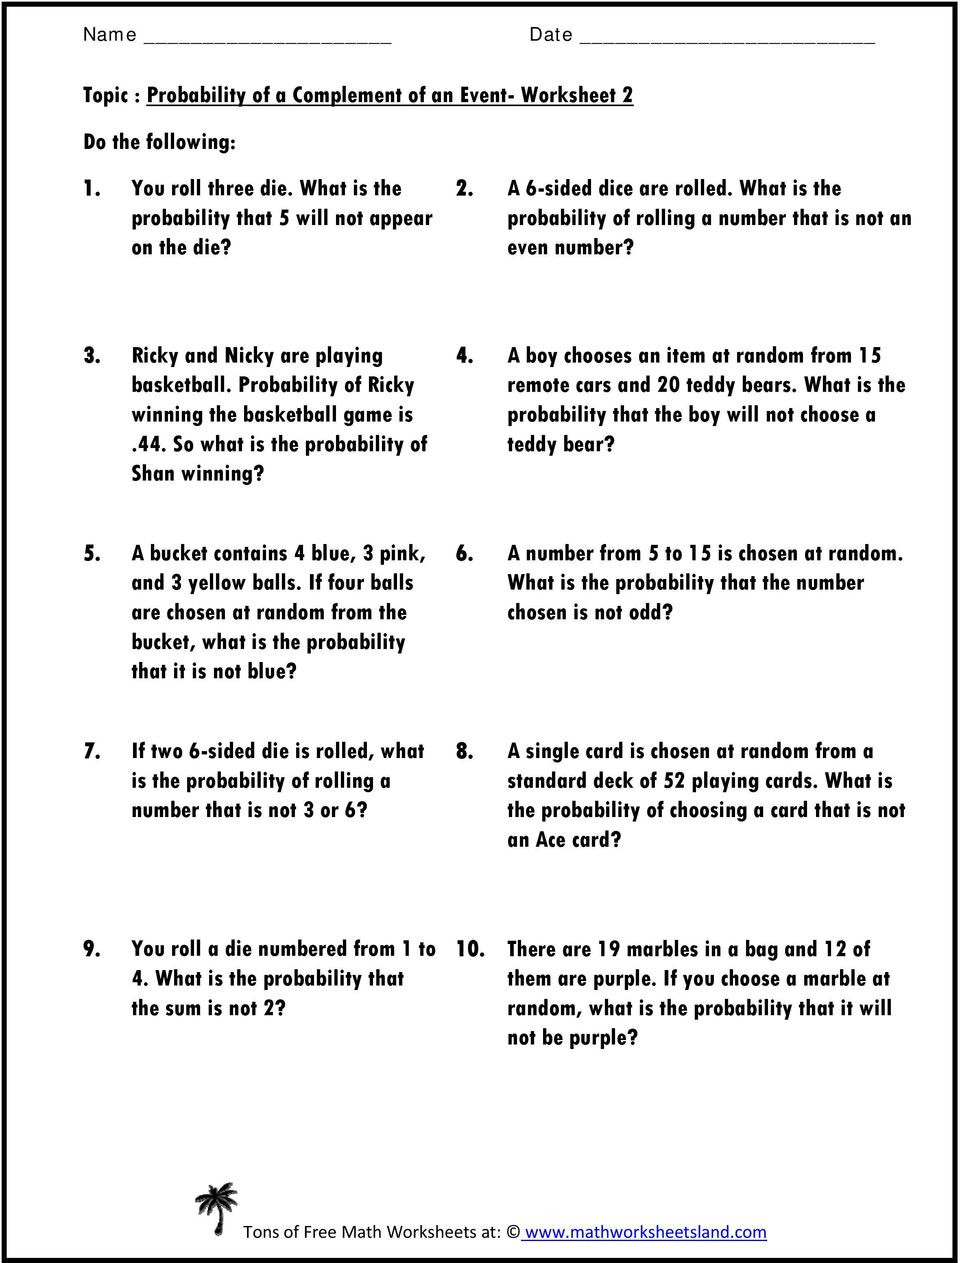 Probability Worksheet High School topic Probability Of A Plement Of An event Worksheet 1